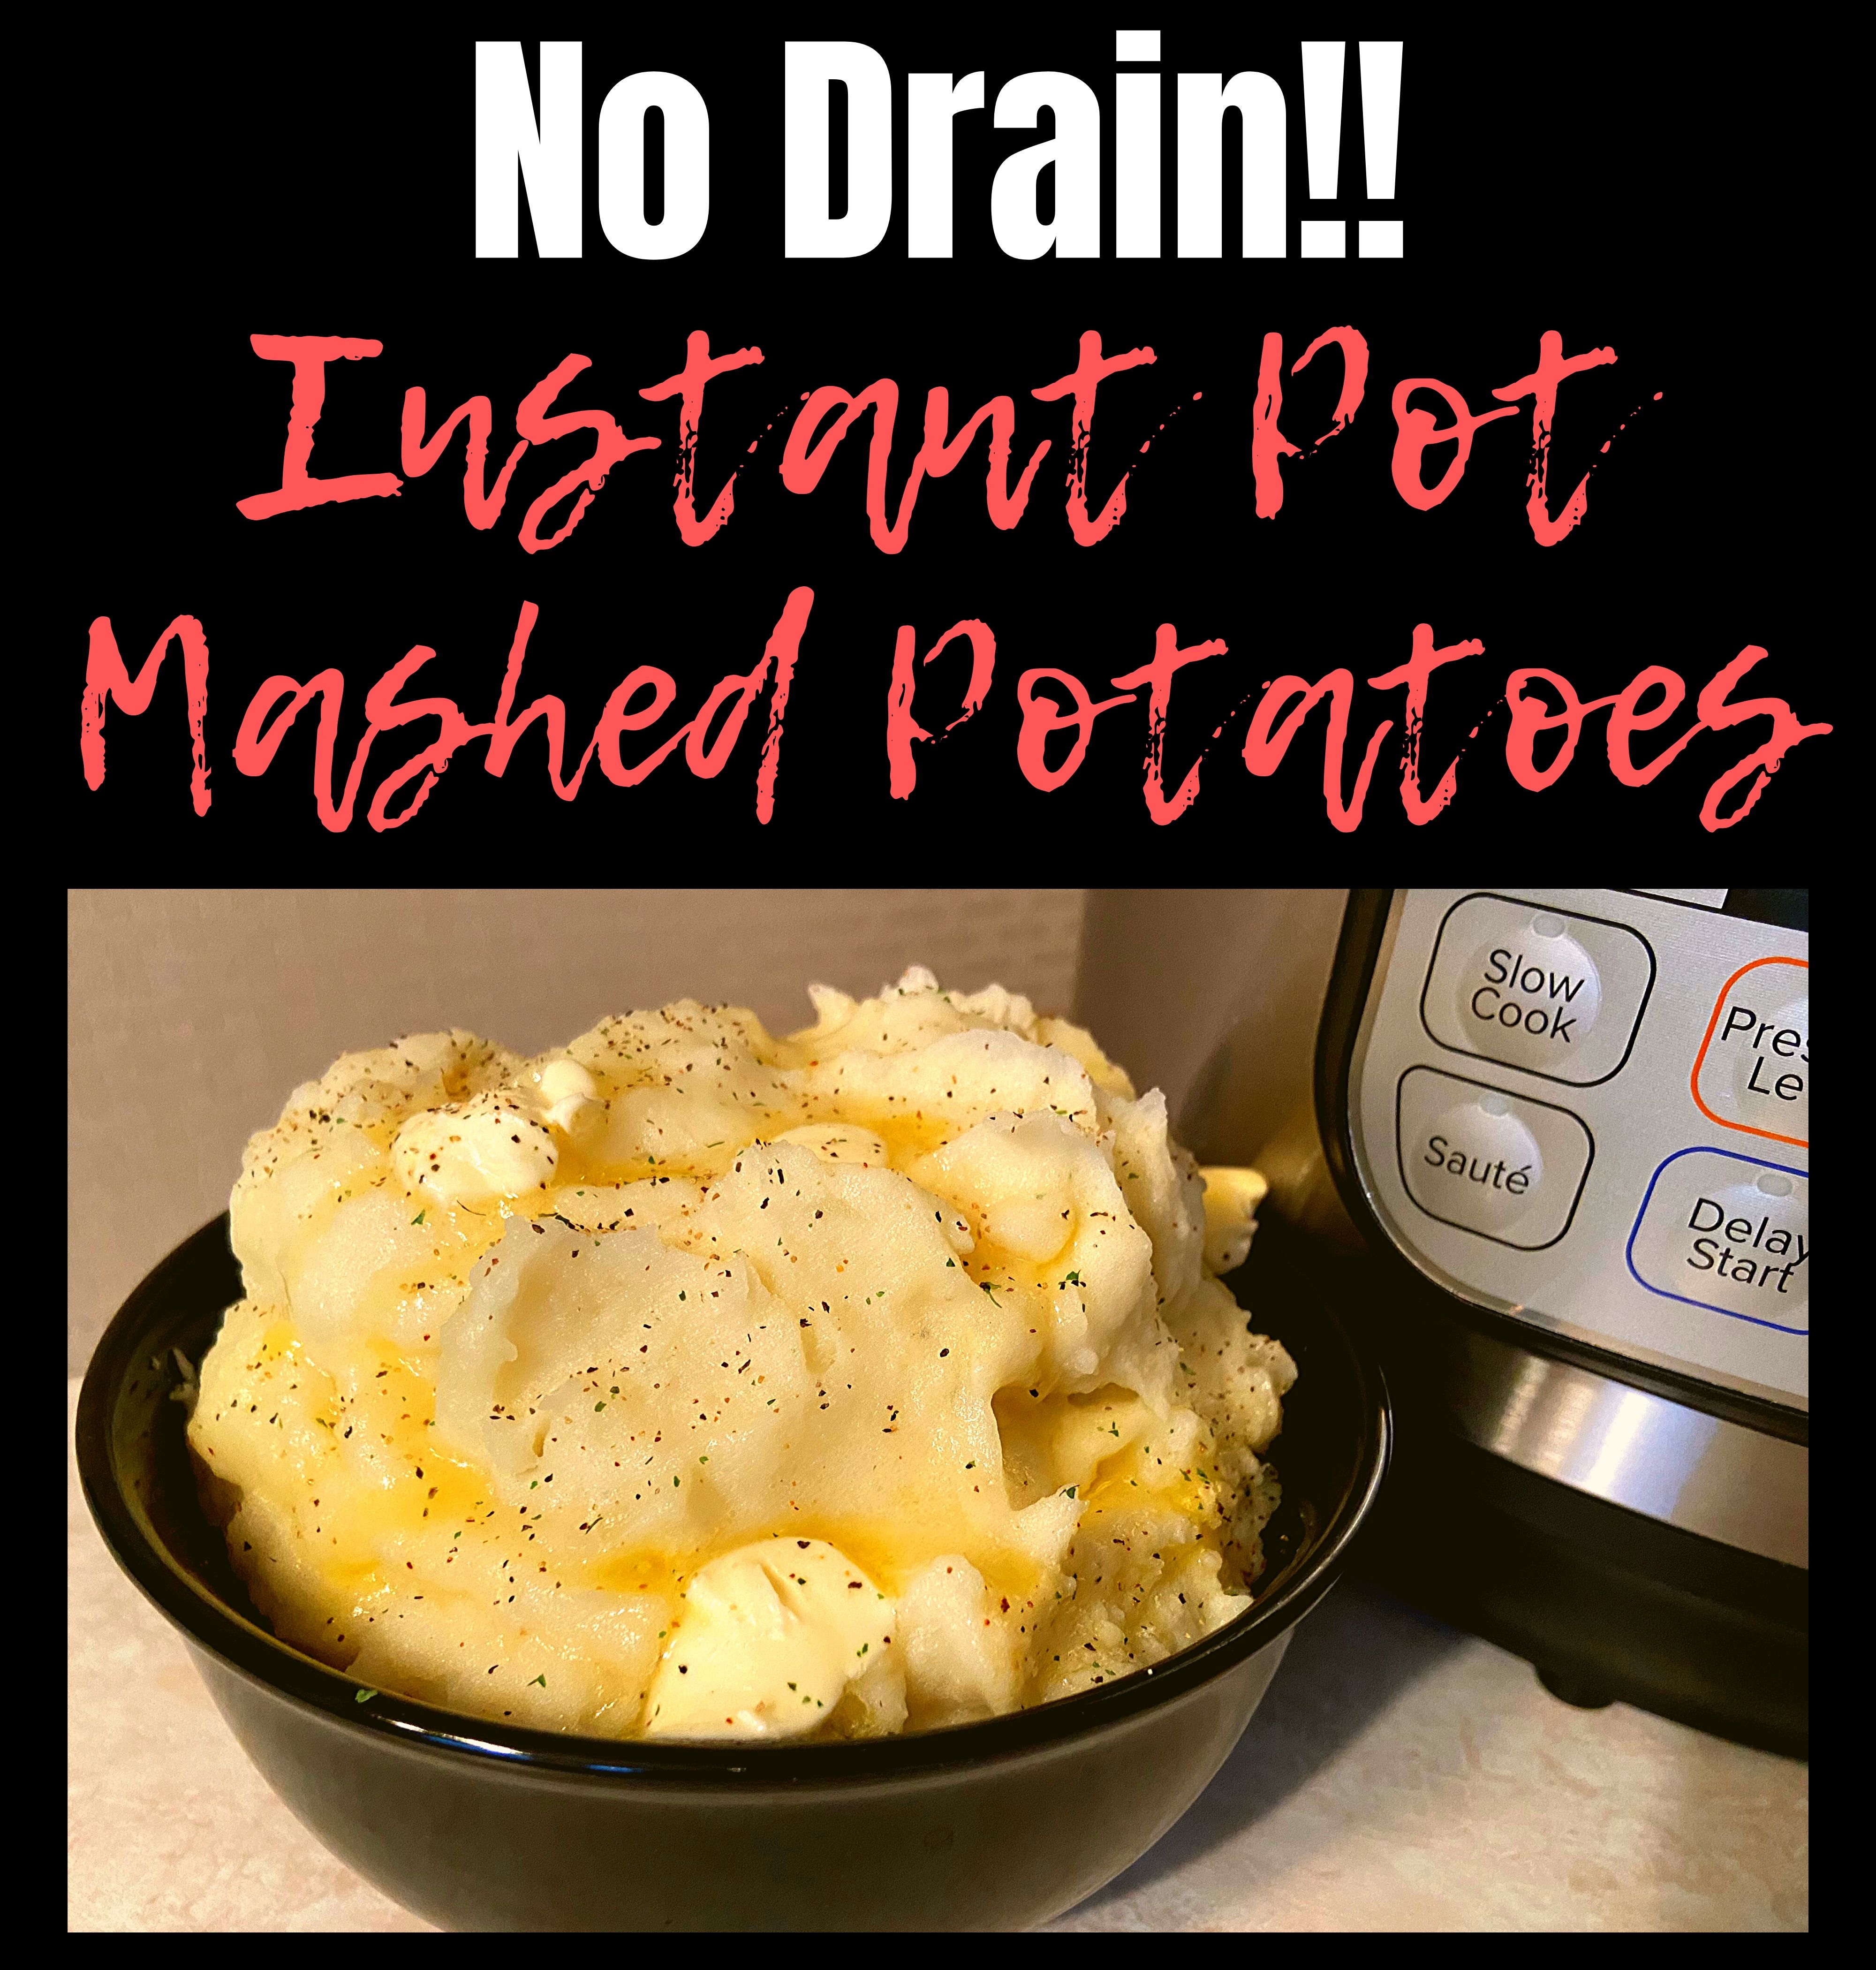 A black bowl filled with fluffy mashed potatoes with butter sitting on a kitchen counter in front of an Instant Pot.